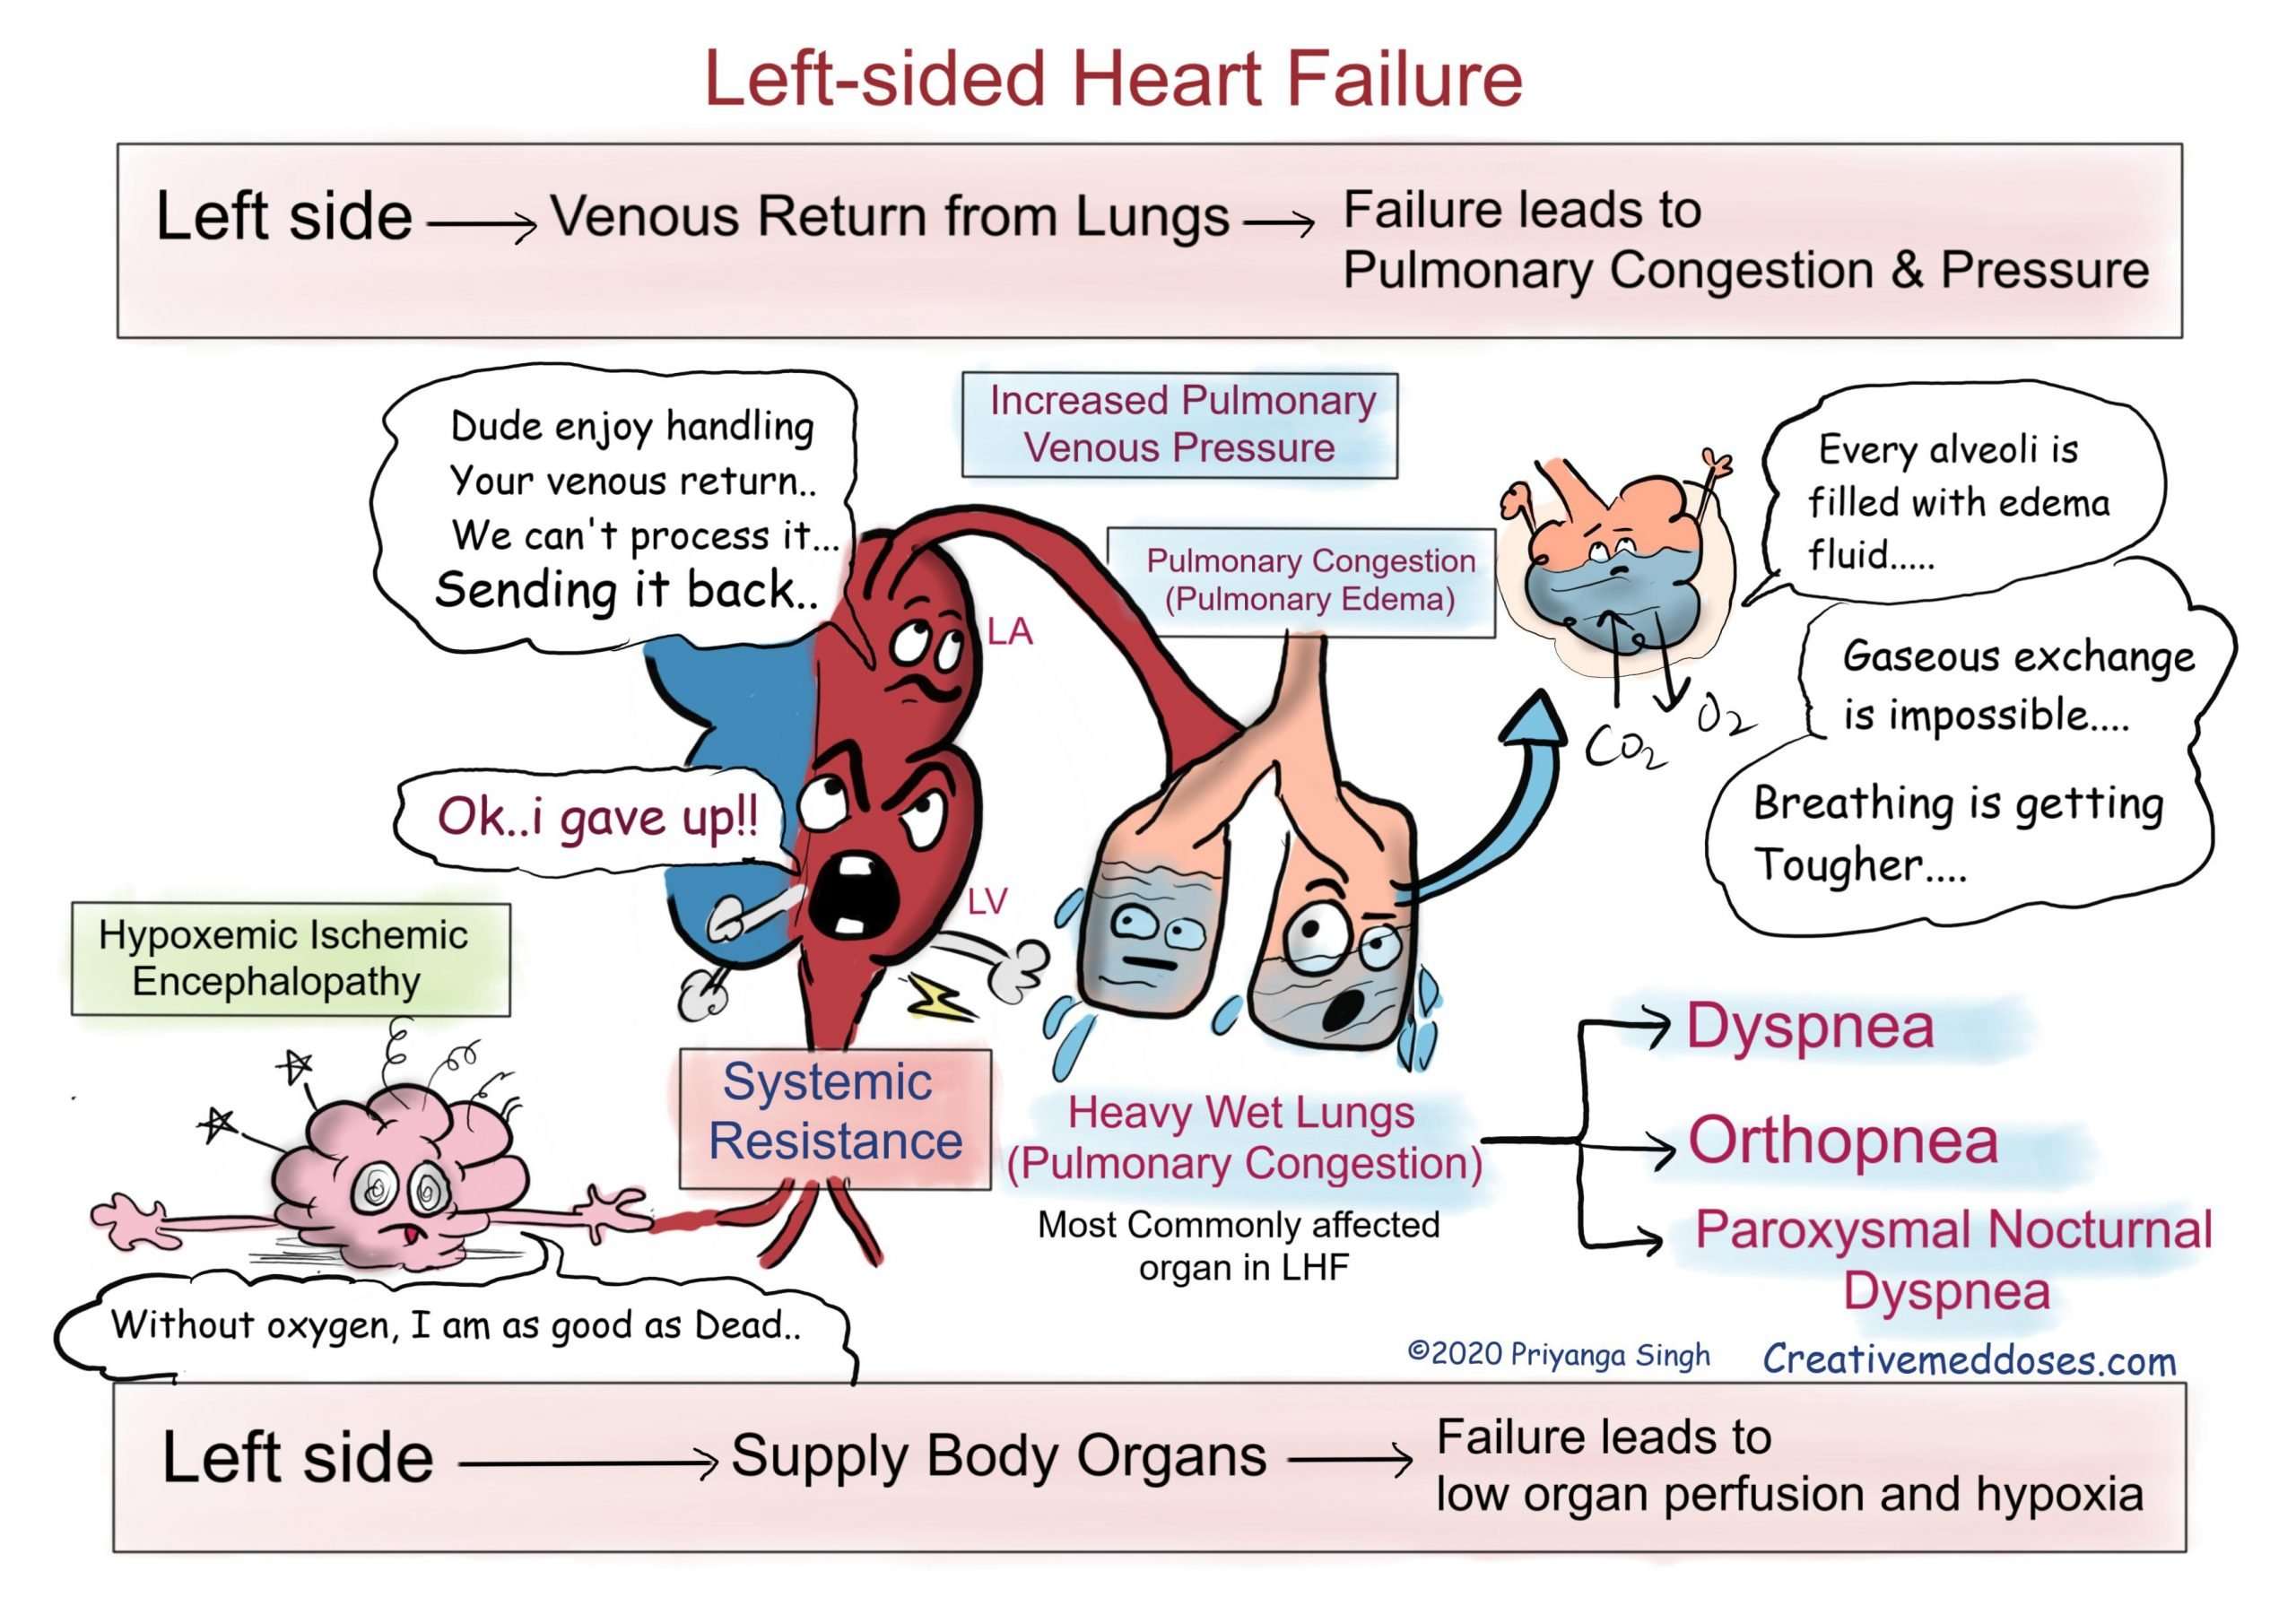 Heart Failure: Left sided VS Right sided